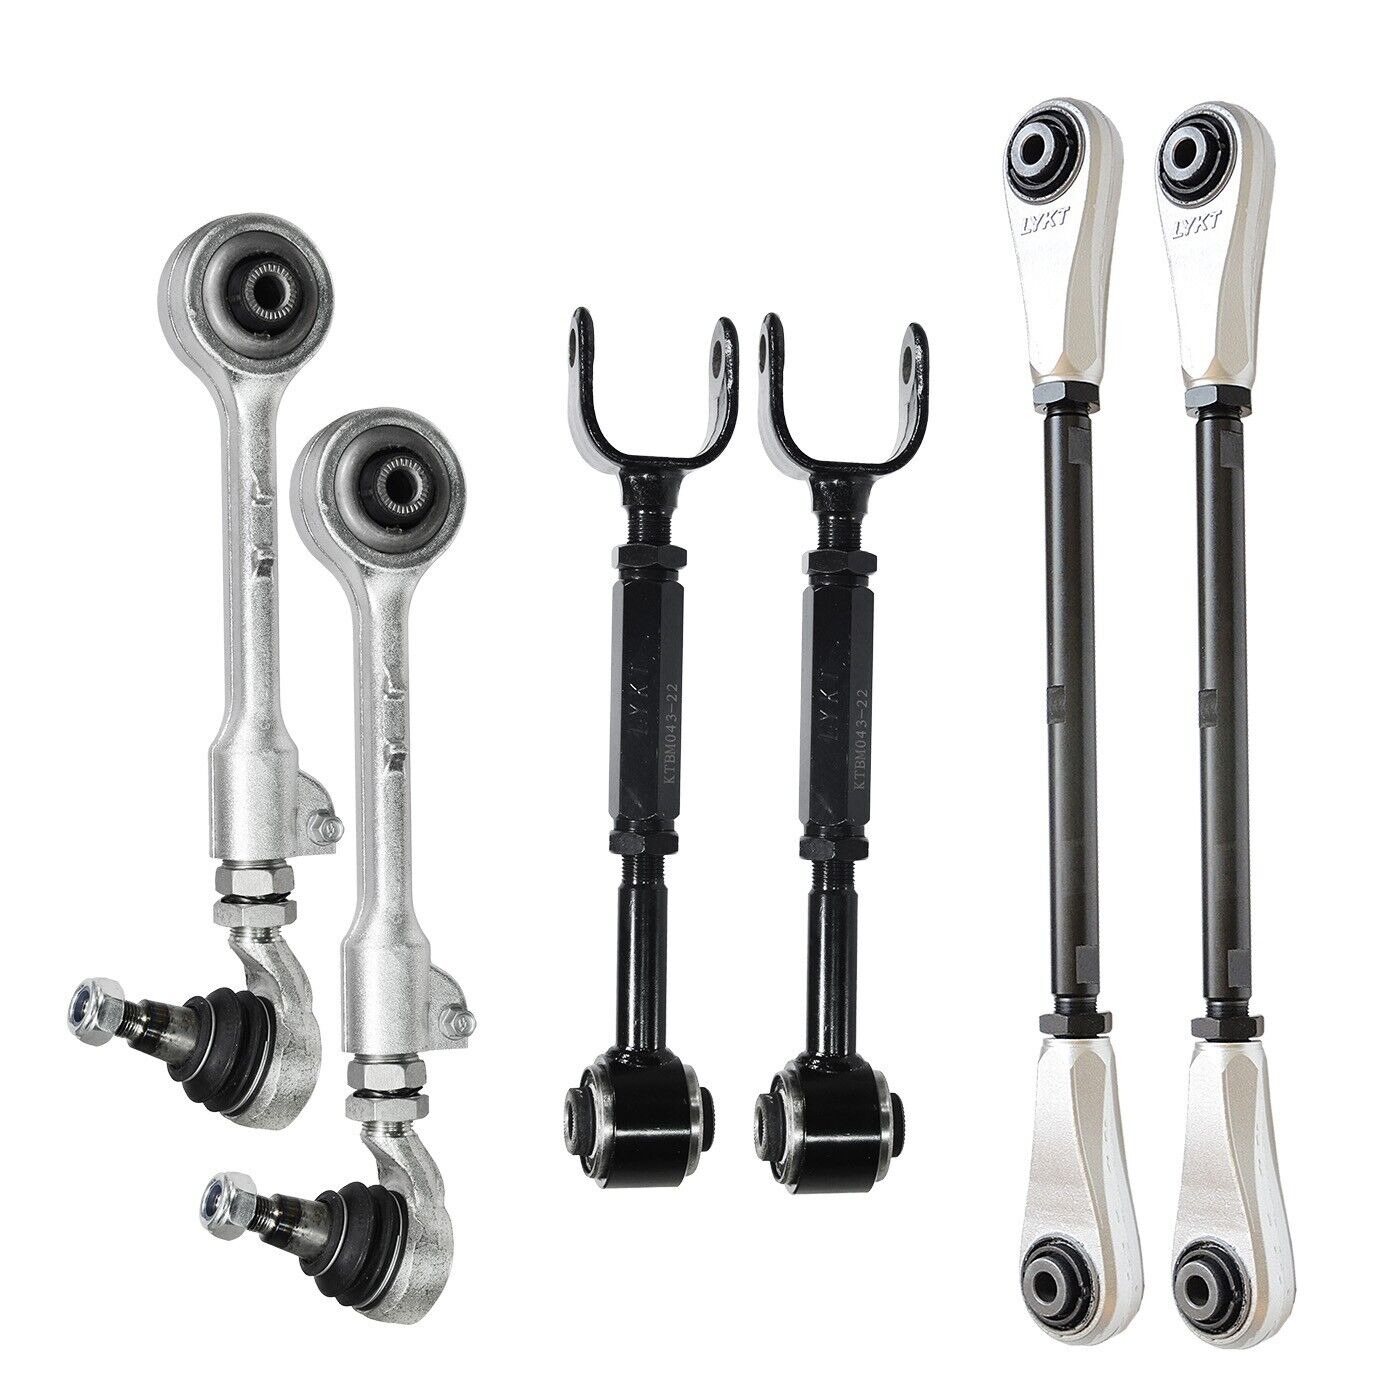 6pcs Alignment Front&Rear Camber&Toe Adjustable Control Arms Kit For BMW X3、X4